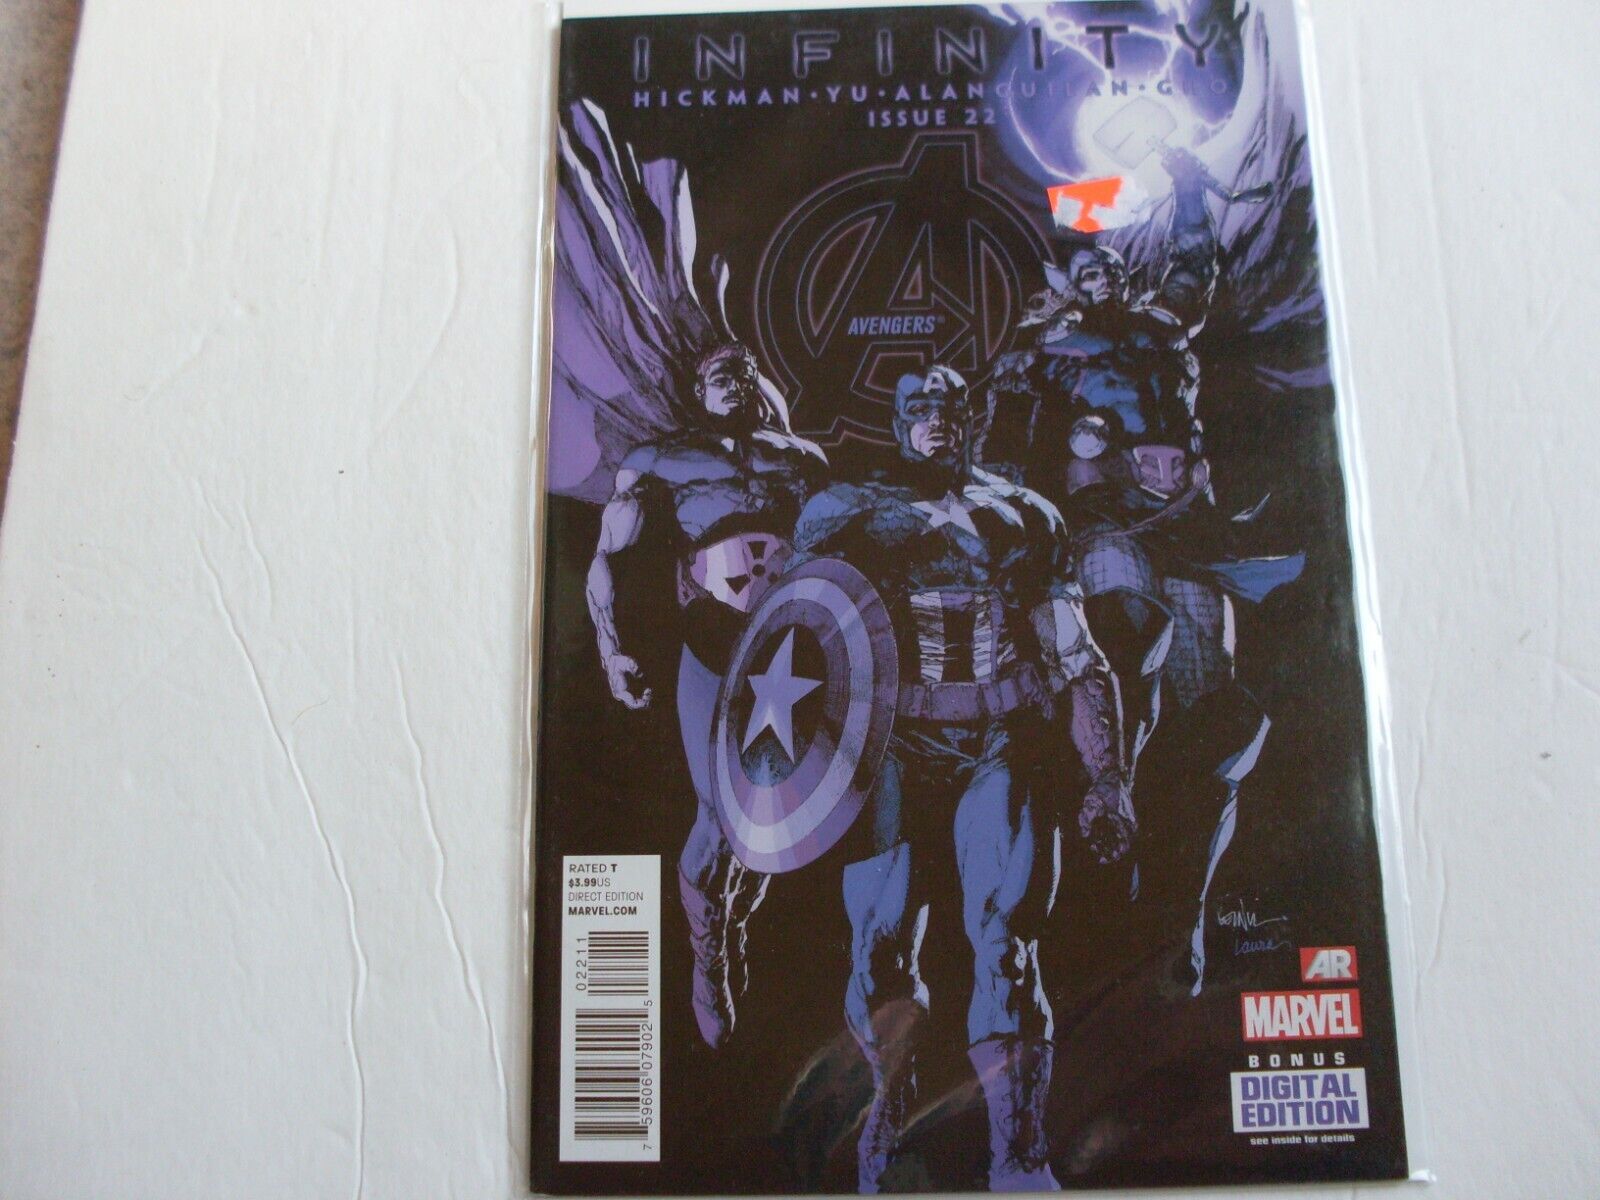 Avengers 22 Infinity Storyline Super Skrull,Annihilus,Thor,Shang Chi,Falcon